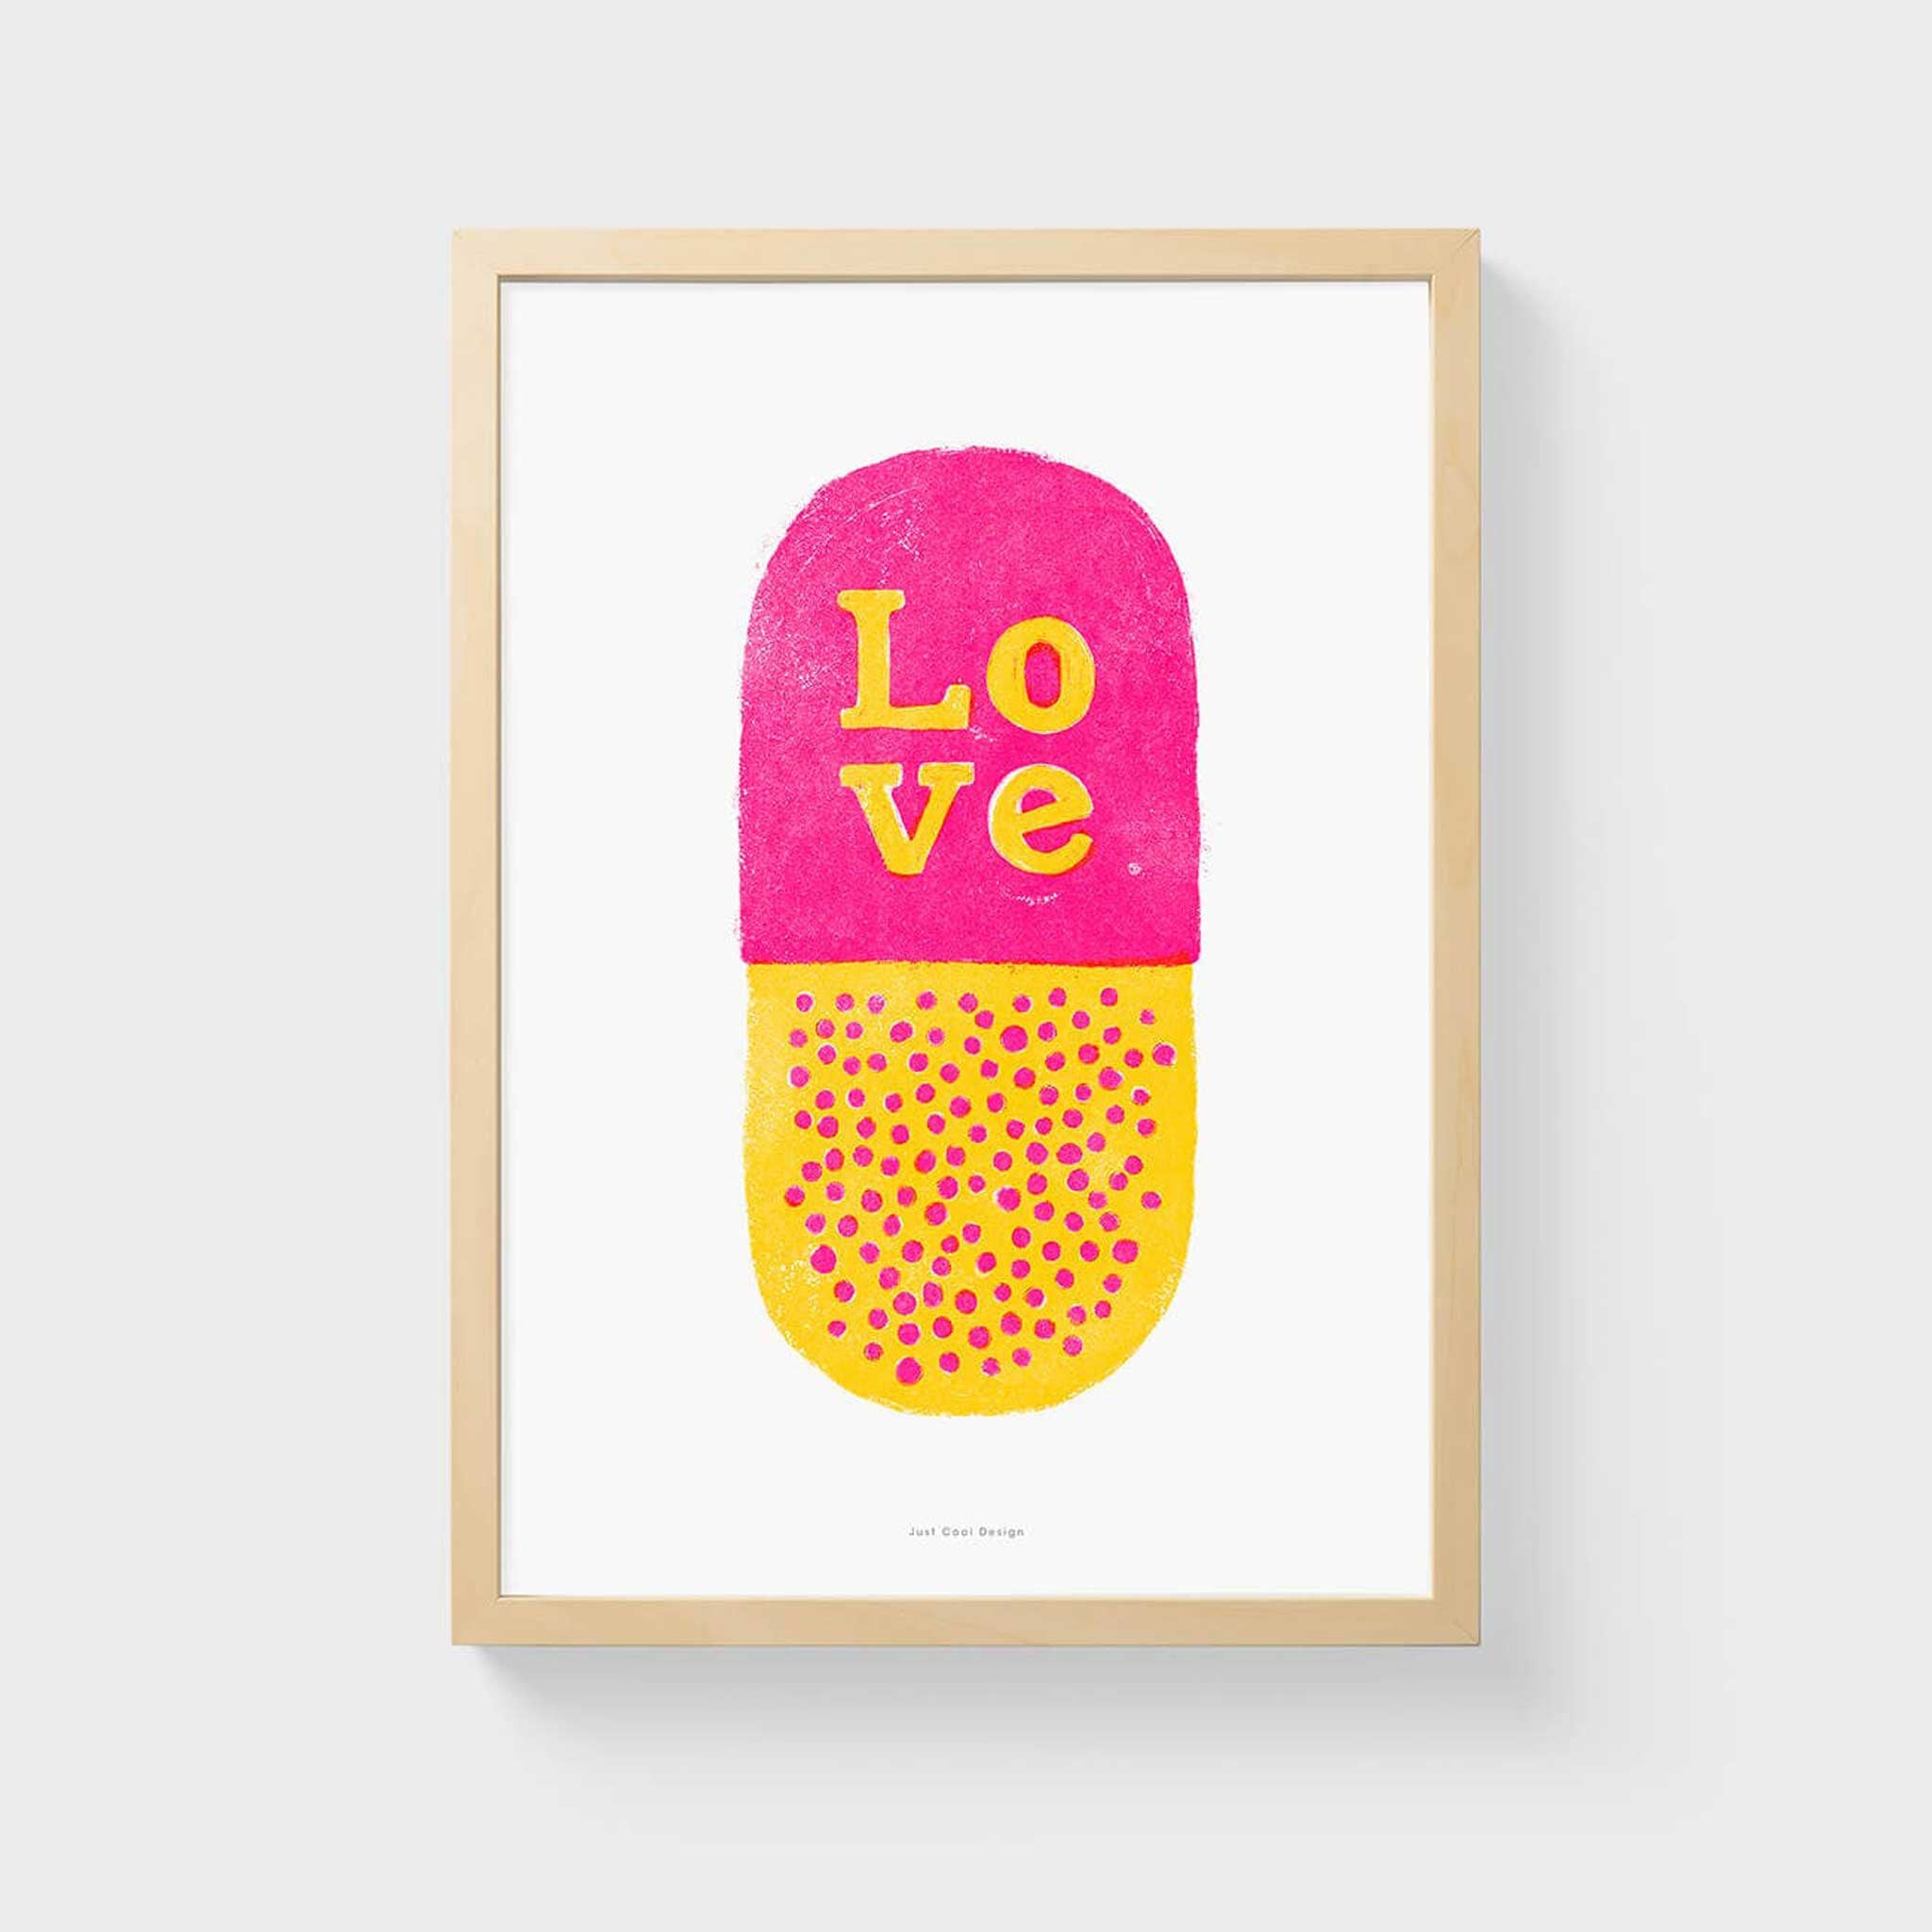 LOVE PILL | Graphic POSTER | A3 Format | Just Another Cool Design